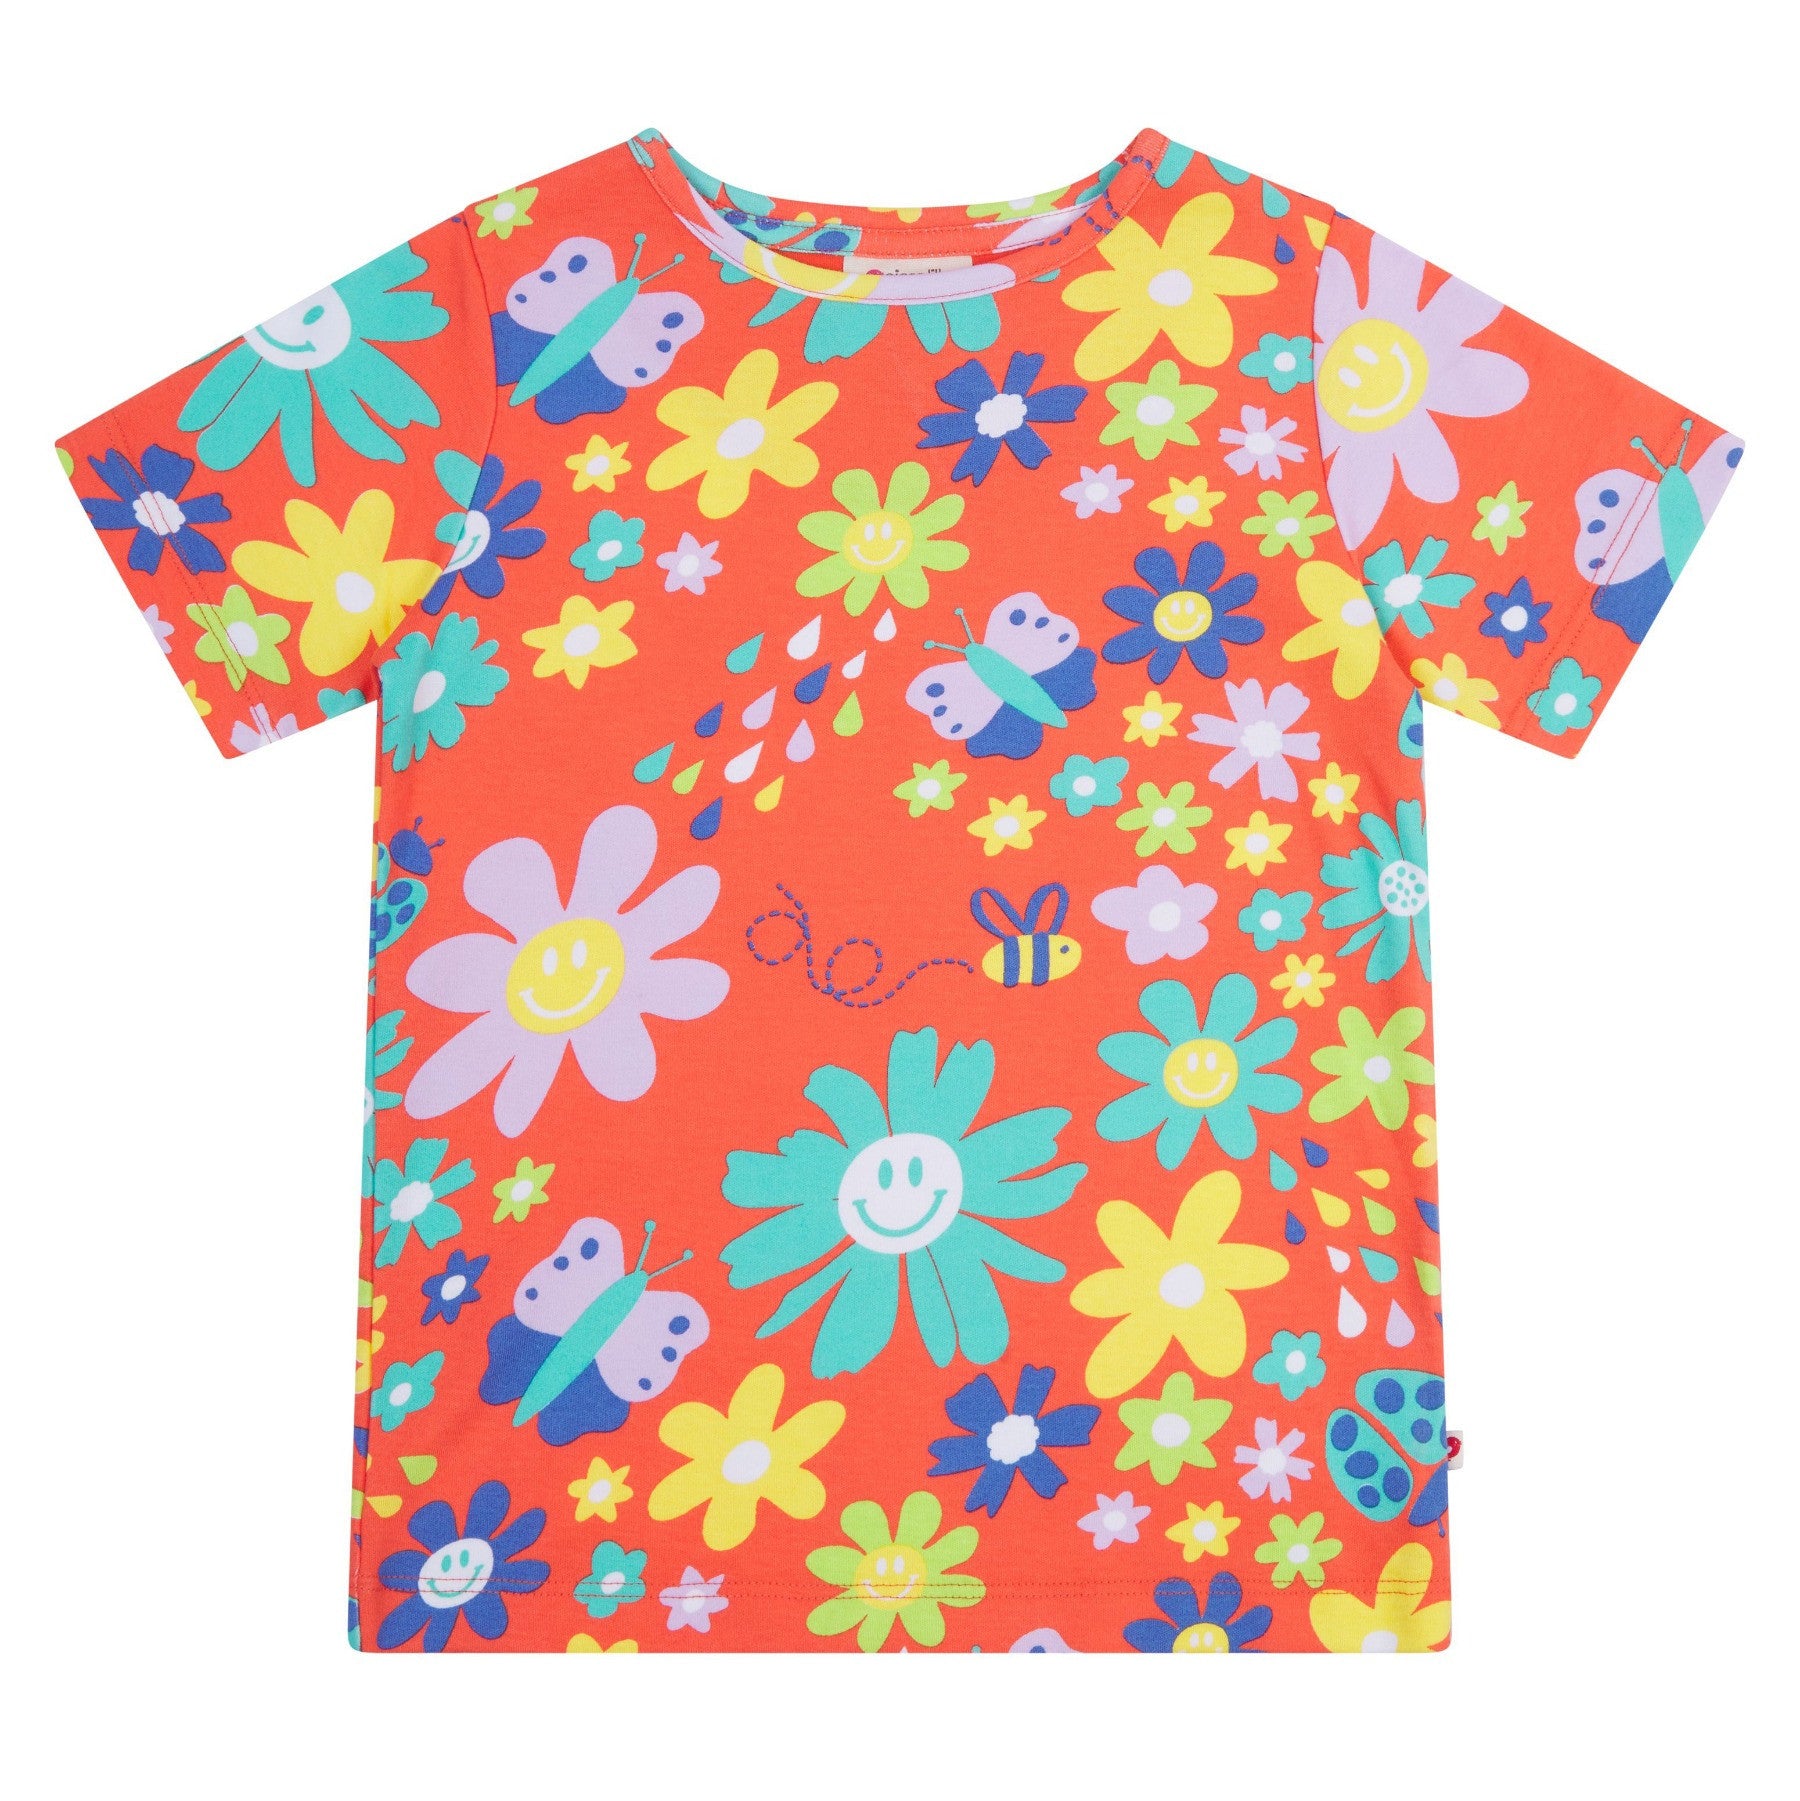 Piccalilly organic All over print t-shirt- flower power